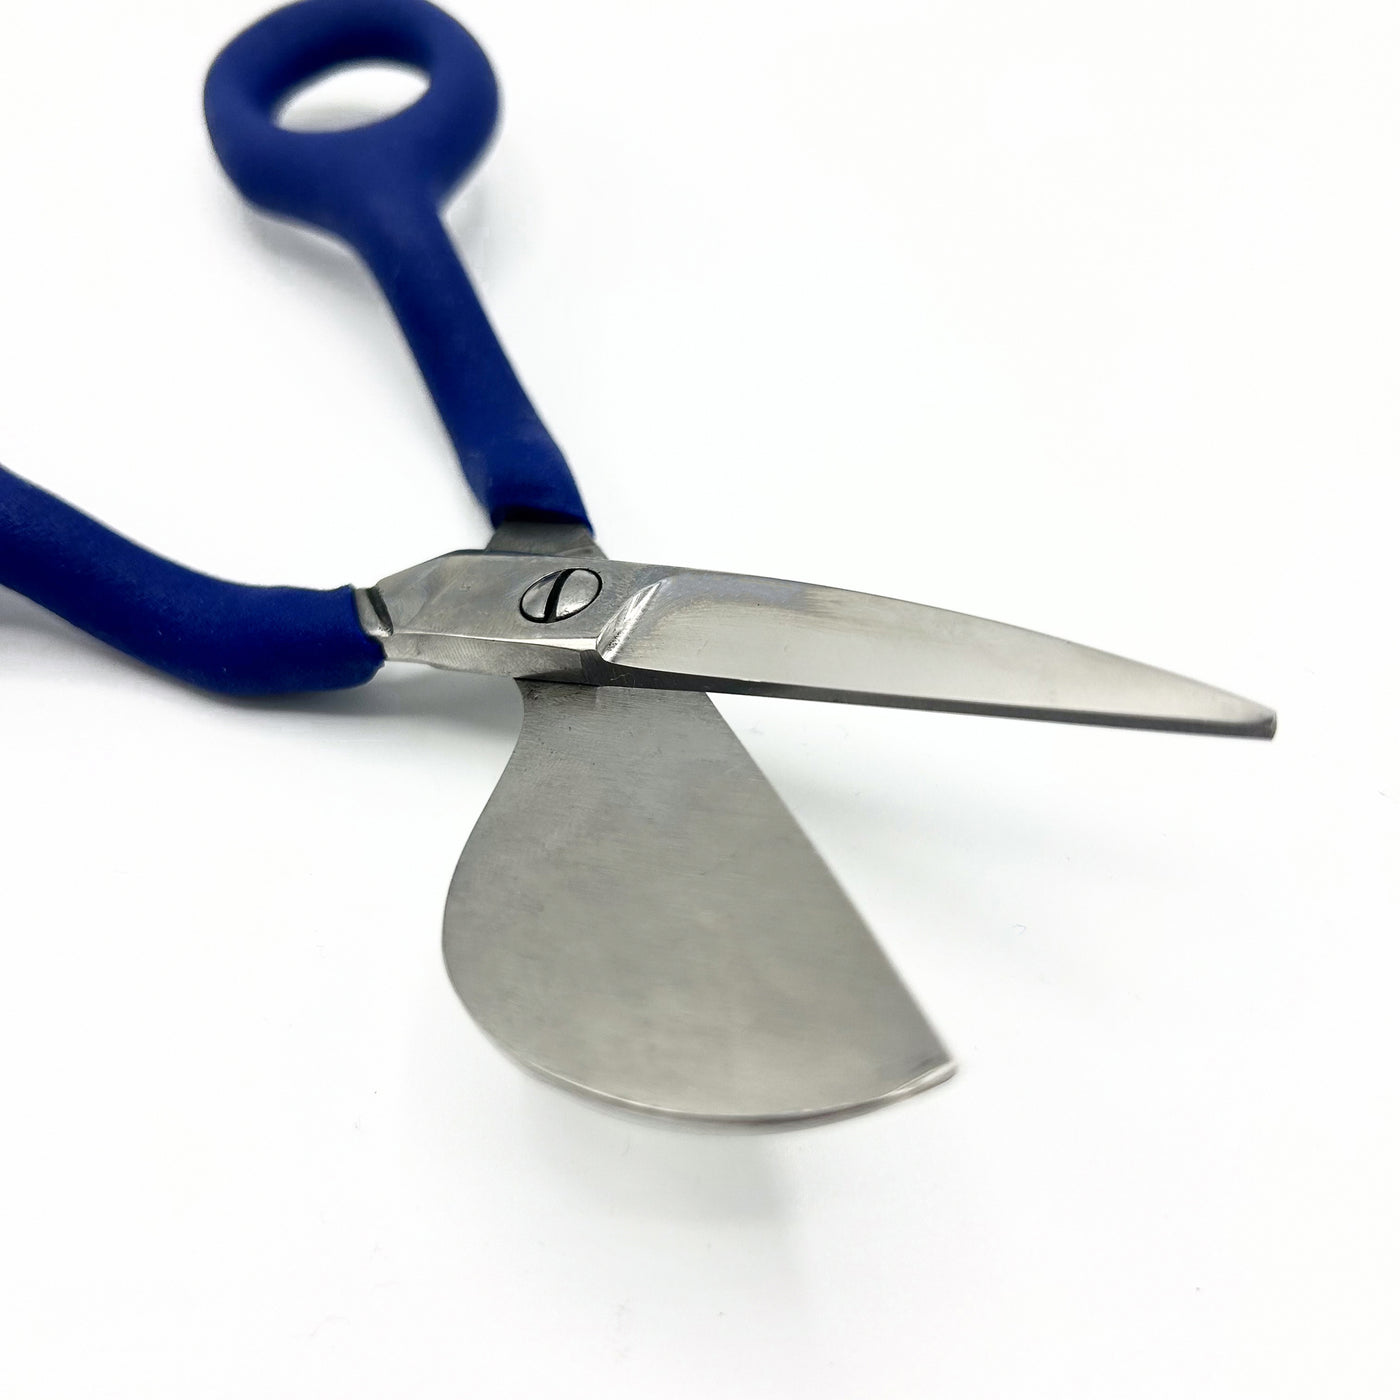 Duckbill Scissors with a wide paddle blade for precise close-up trimming, an essential tool for professionals and beginners 